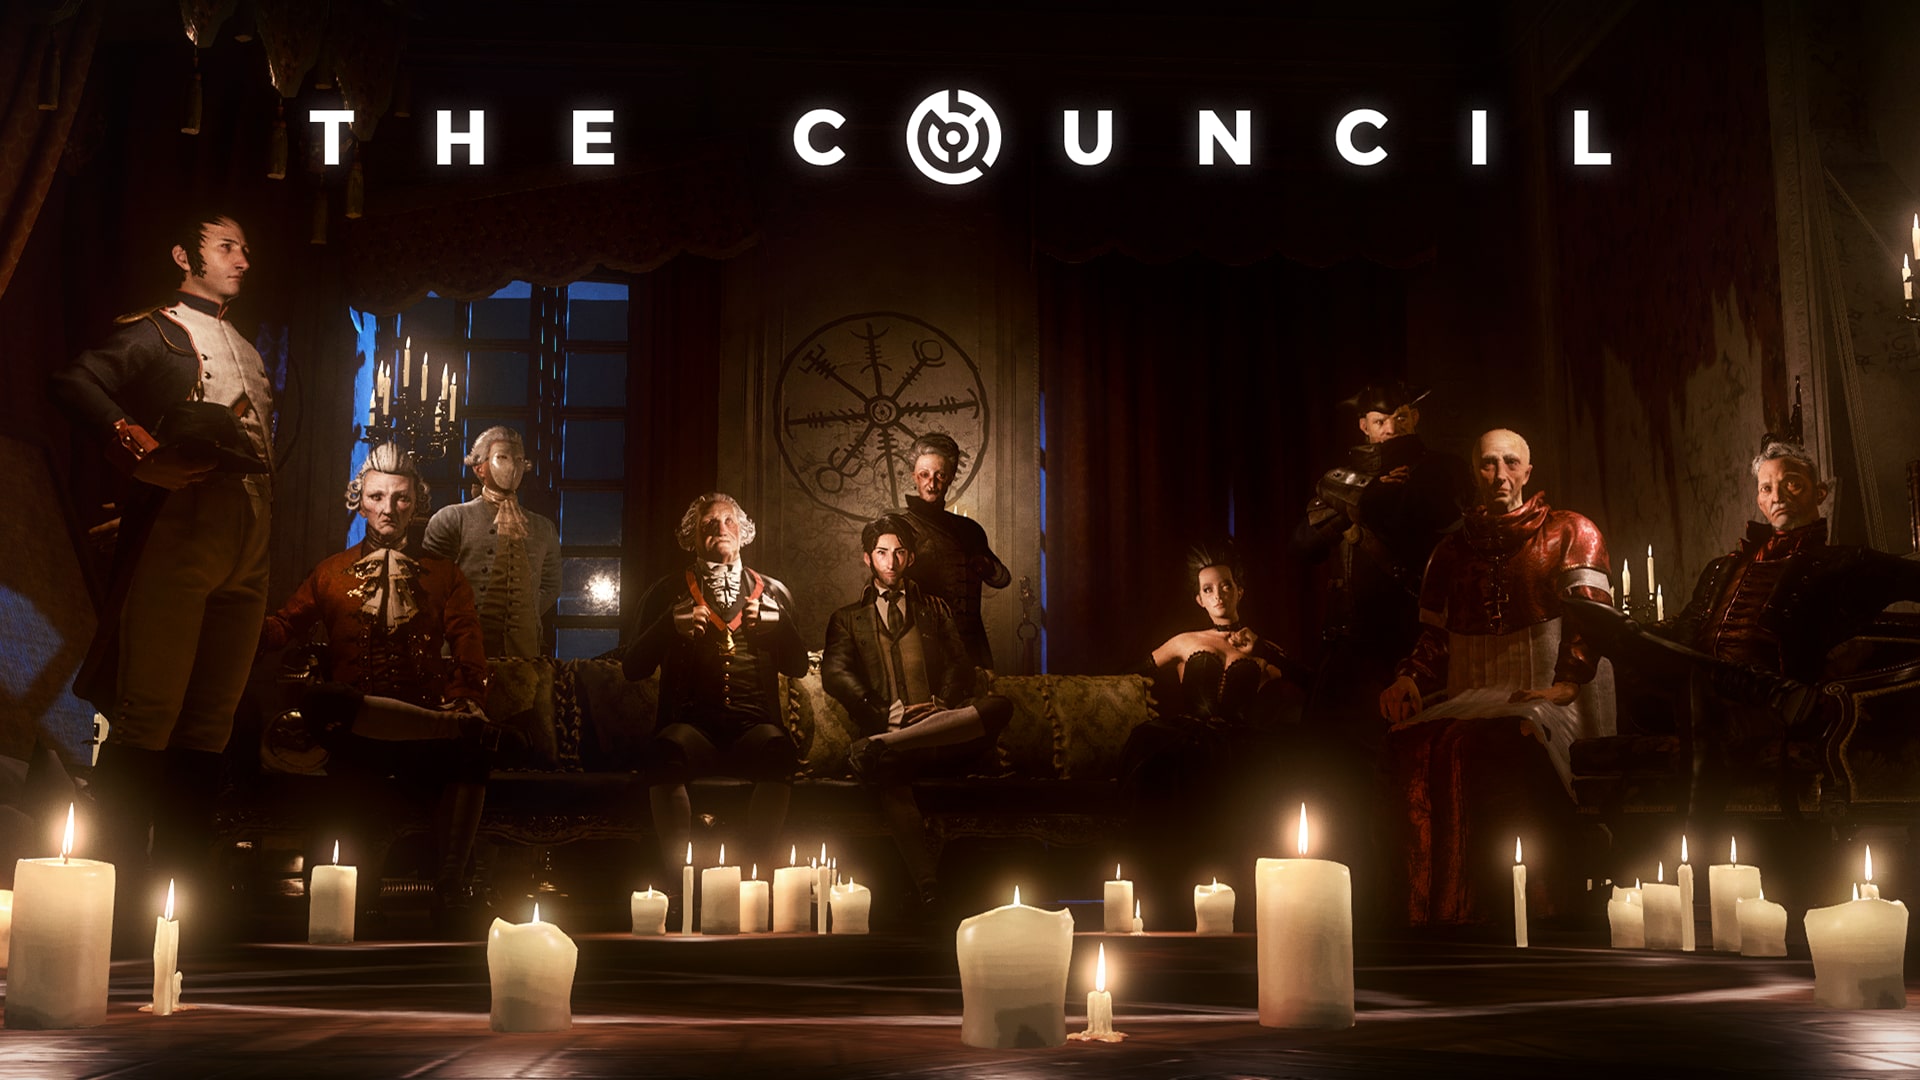 The Council - The